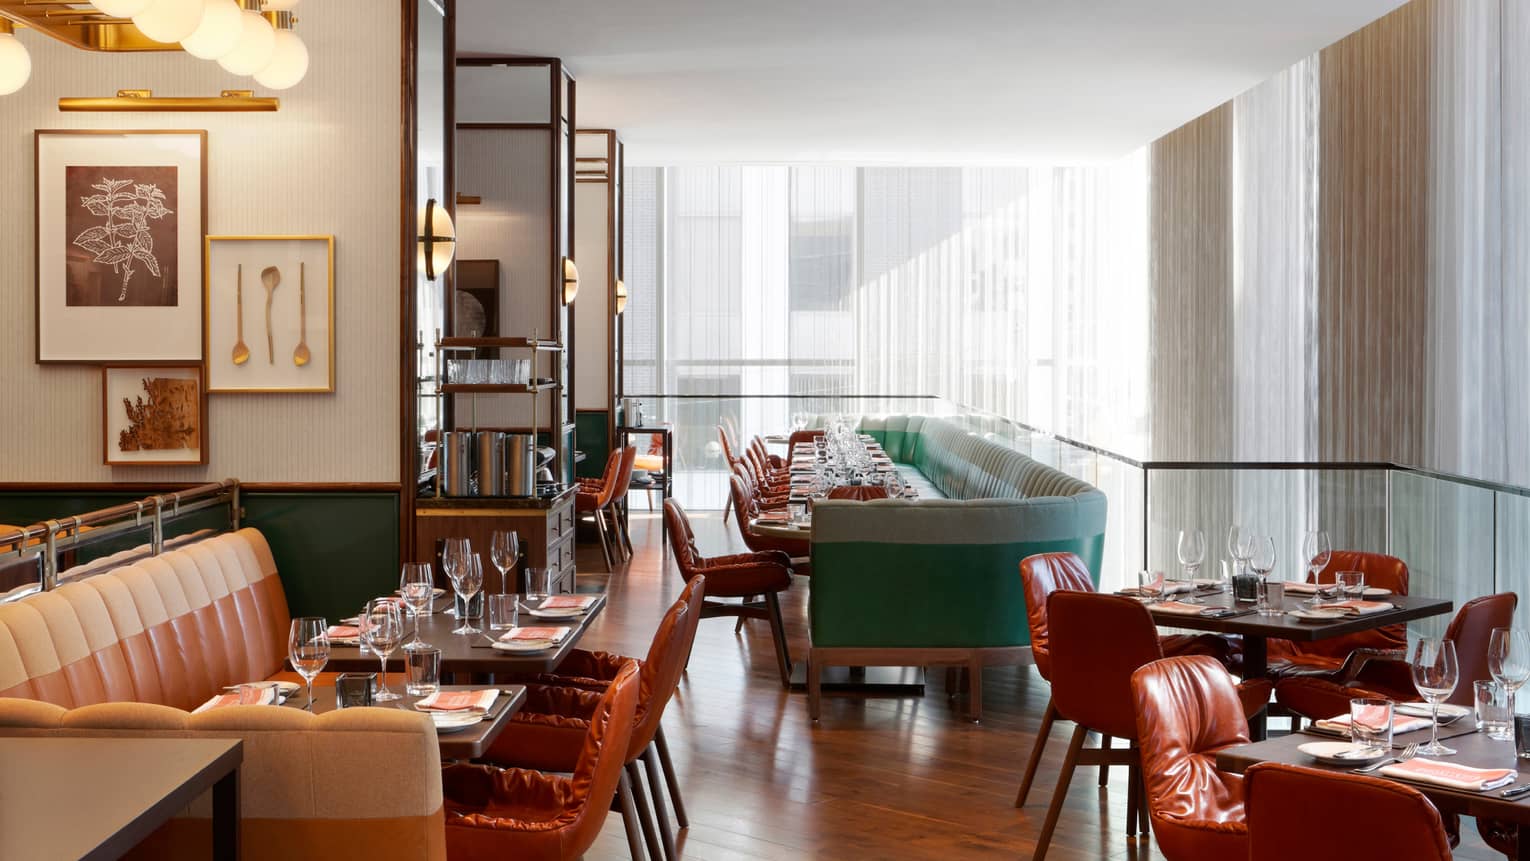 Café Boulud sunny dining room with leather seats and banquettes. tables, white curtains